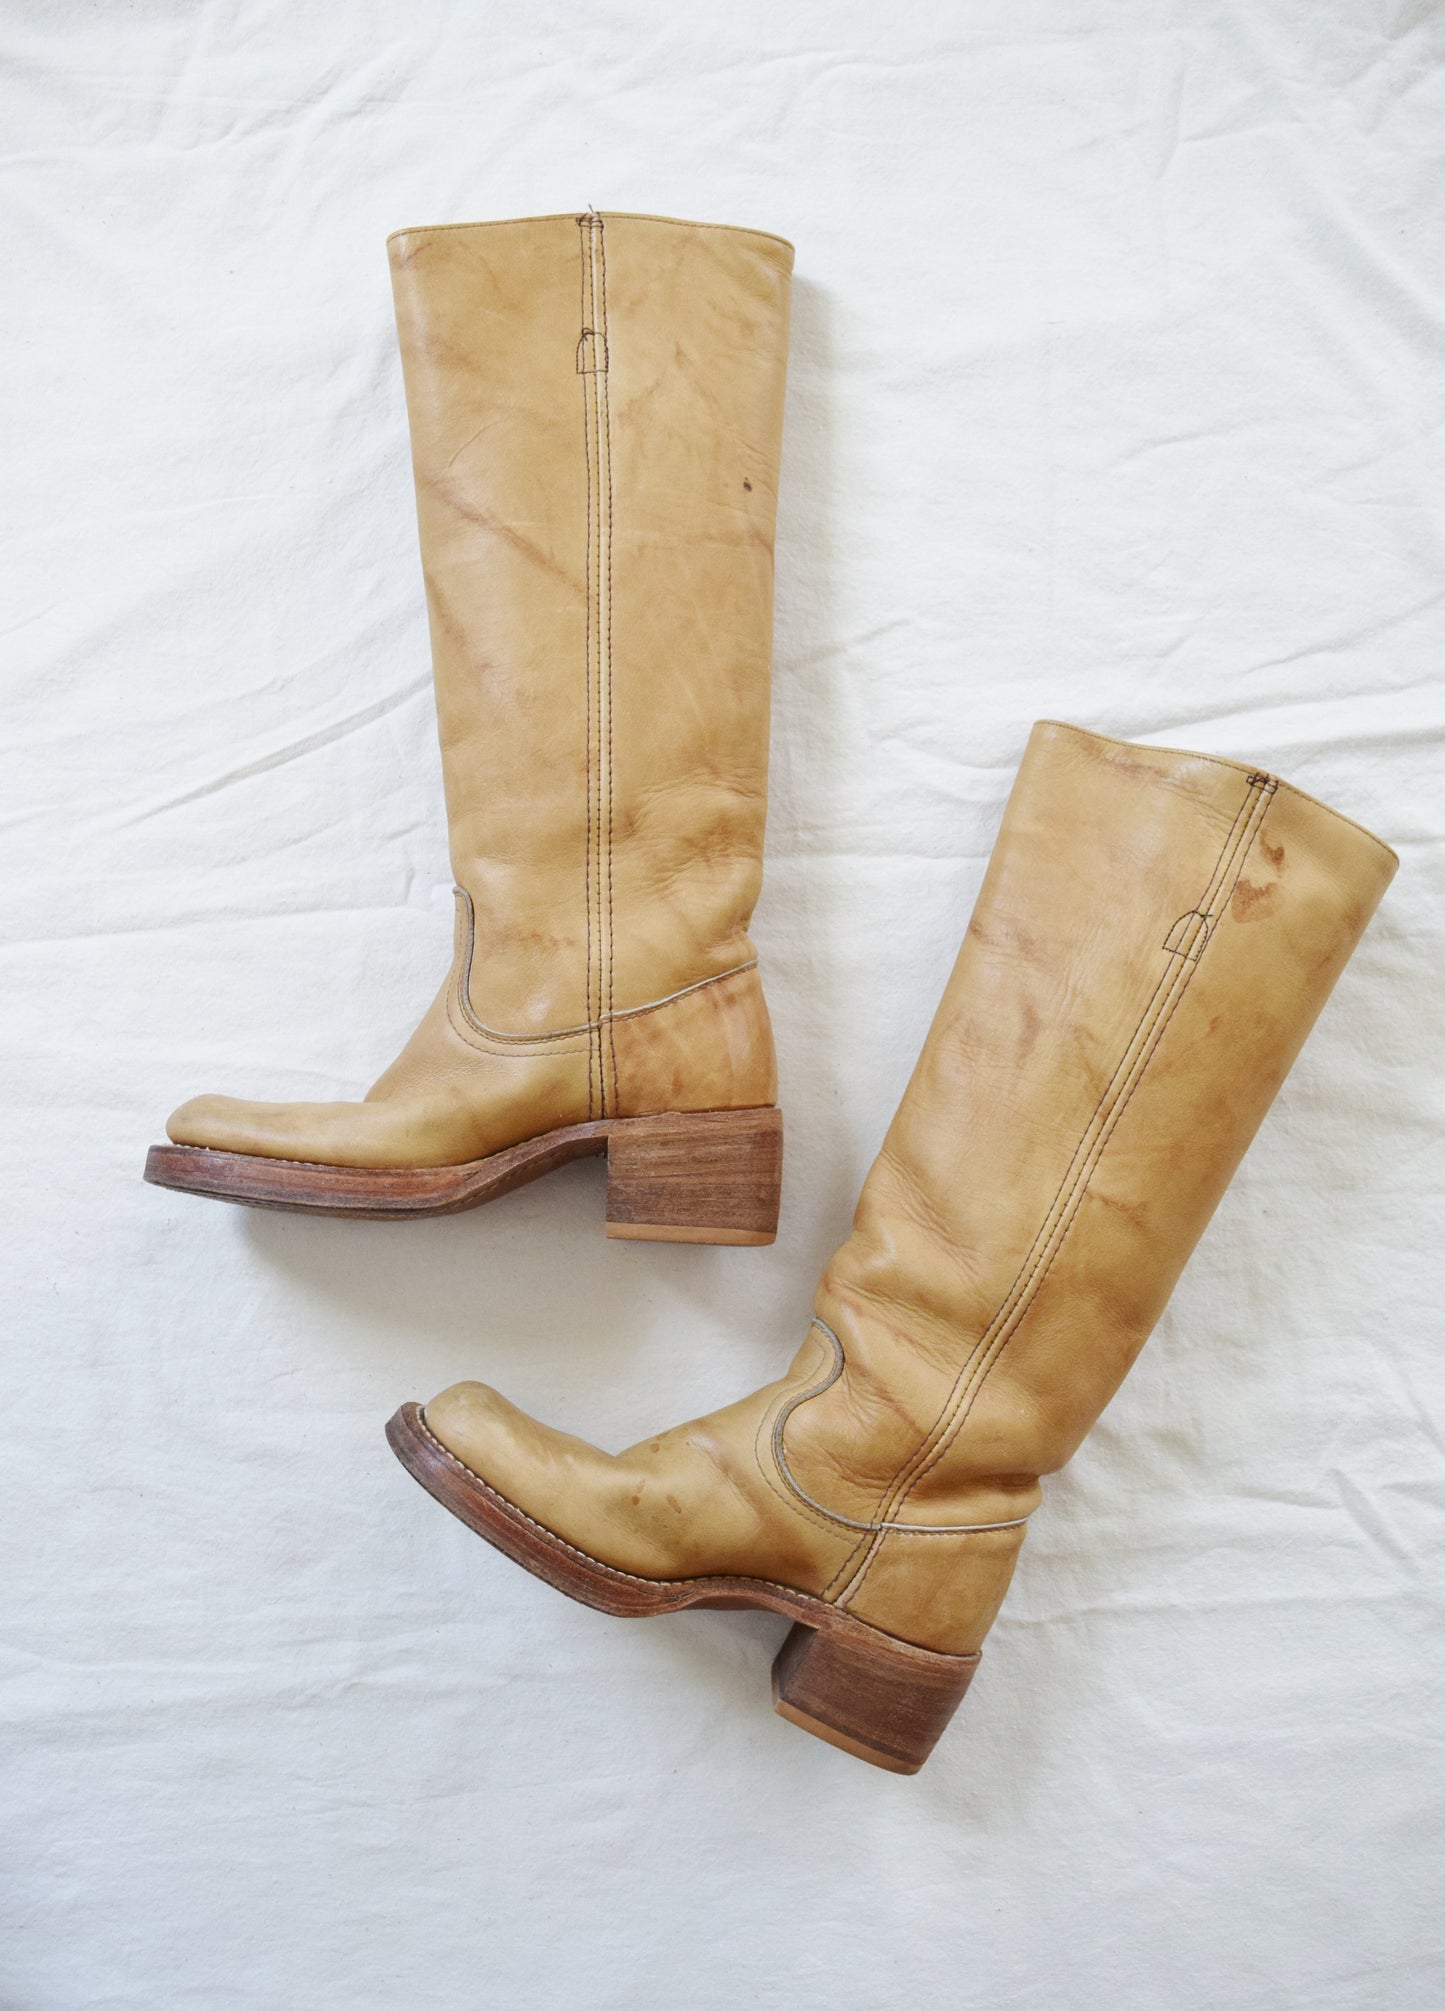 1970s Frye Campus Boots | Vintage Frye Boots | Banana Tan Frye Boots | Women's US Size 5